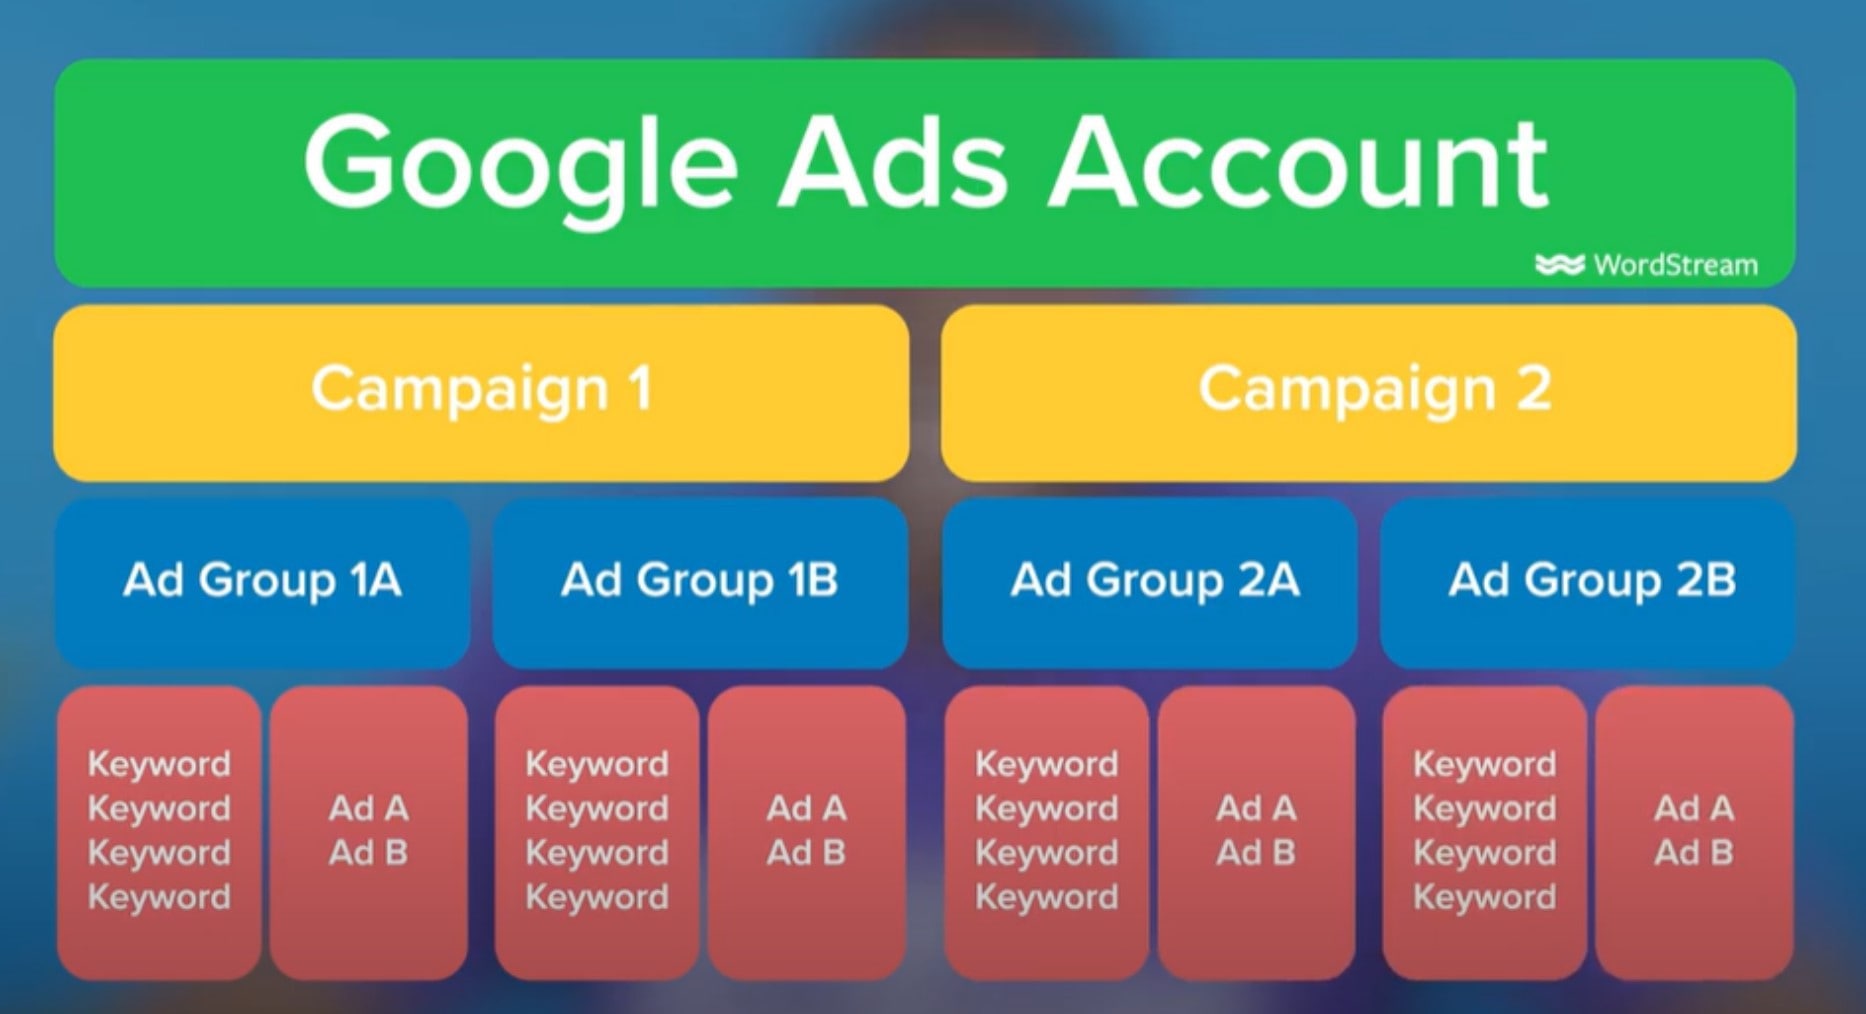 Structure of a Google Ads account